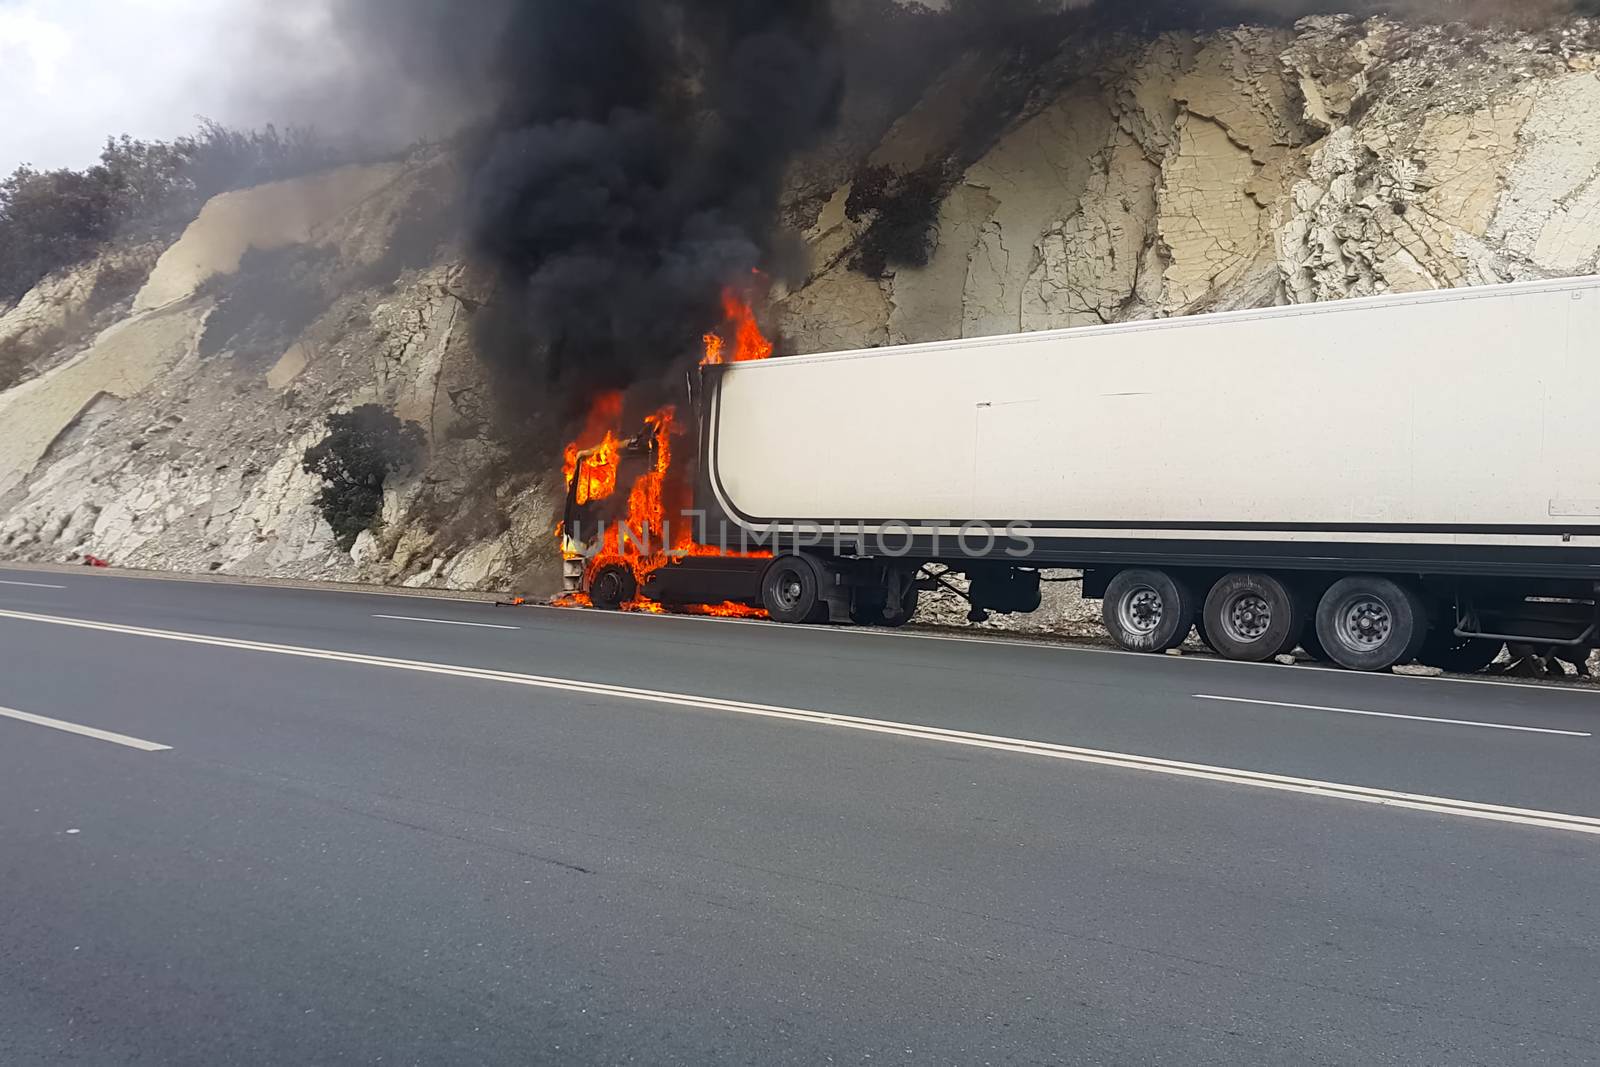 Burning truck on the road. cab of the truck is on fire. by DePo